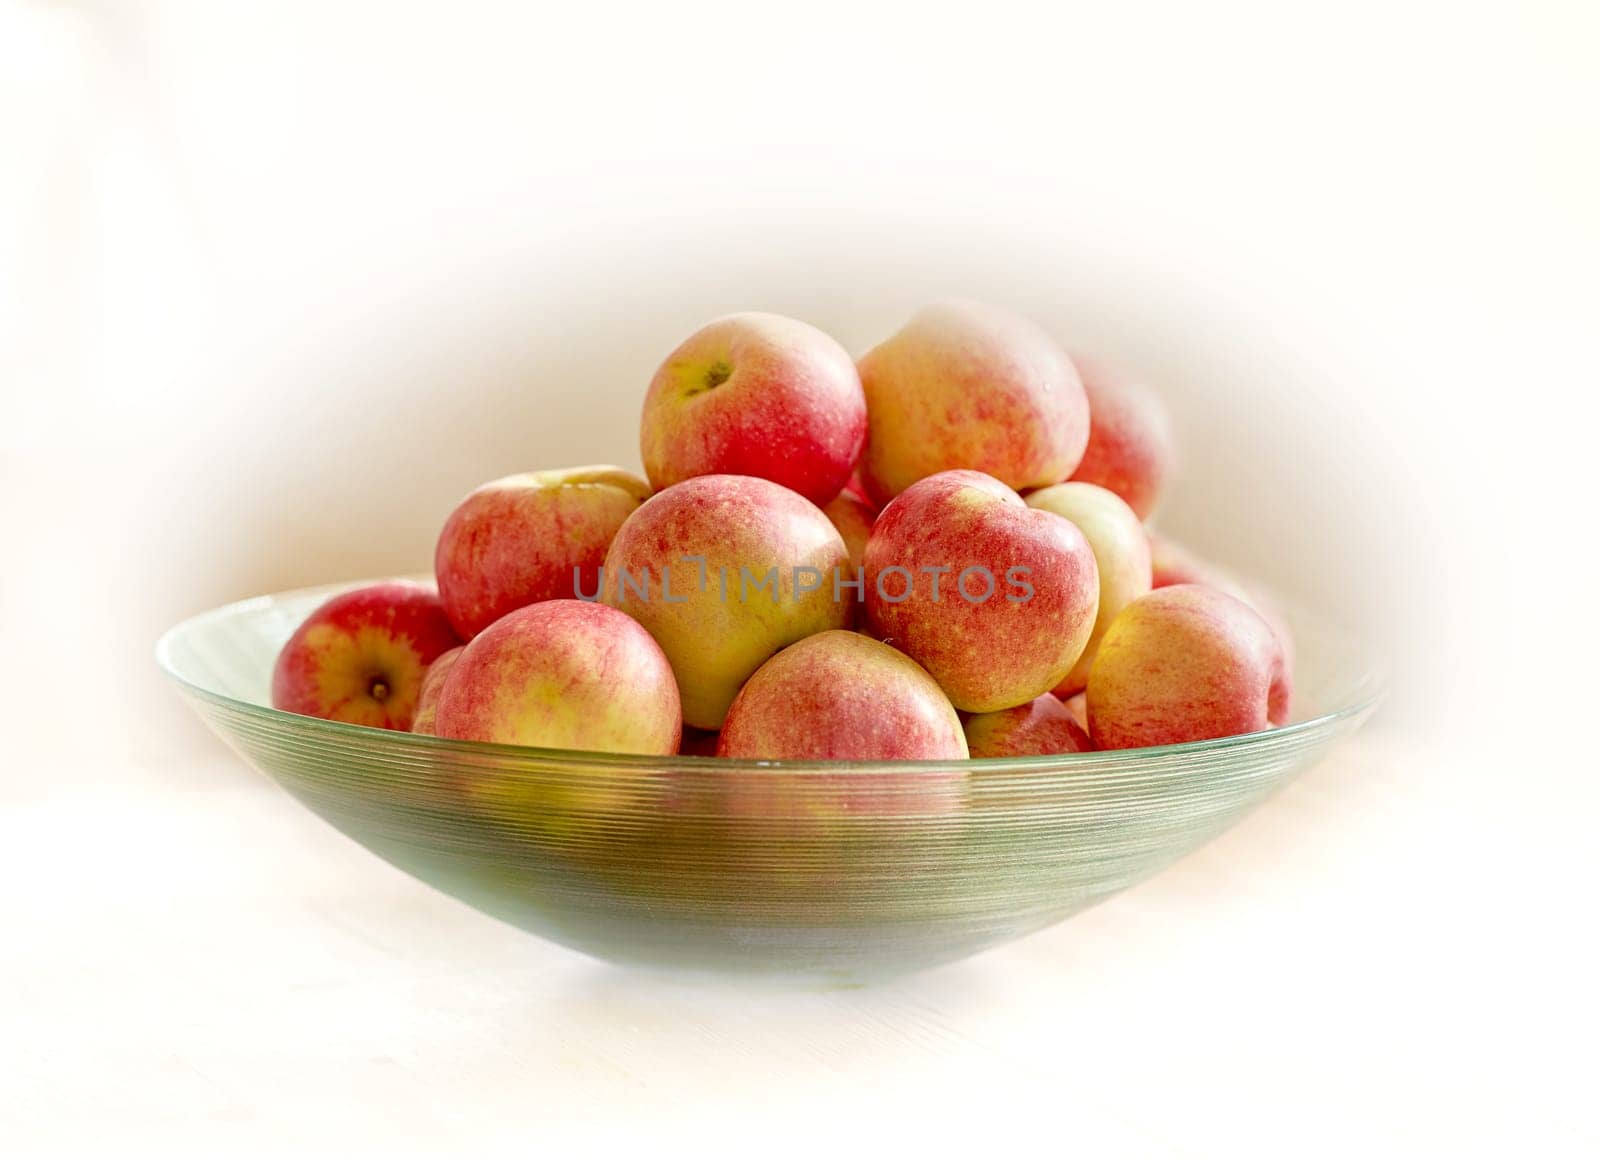 Bowl of red apple, nutrition and snack with health, wellness and organic vitamins and diet. Fruit, plant and harvest with botanical produce, horticulture and vegetation isolated on white background.